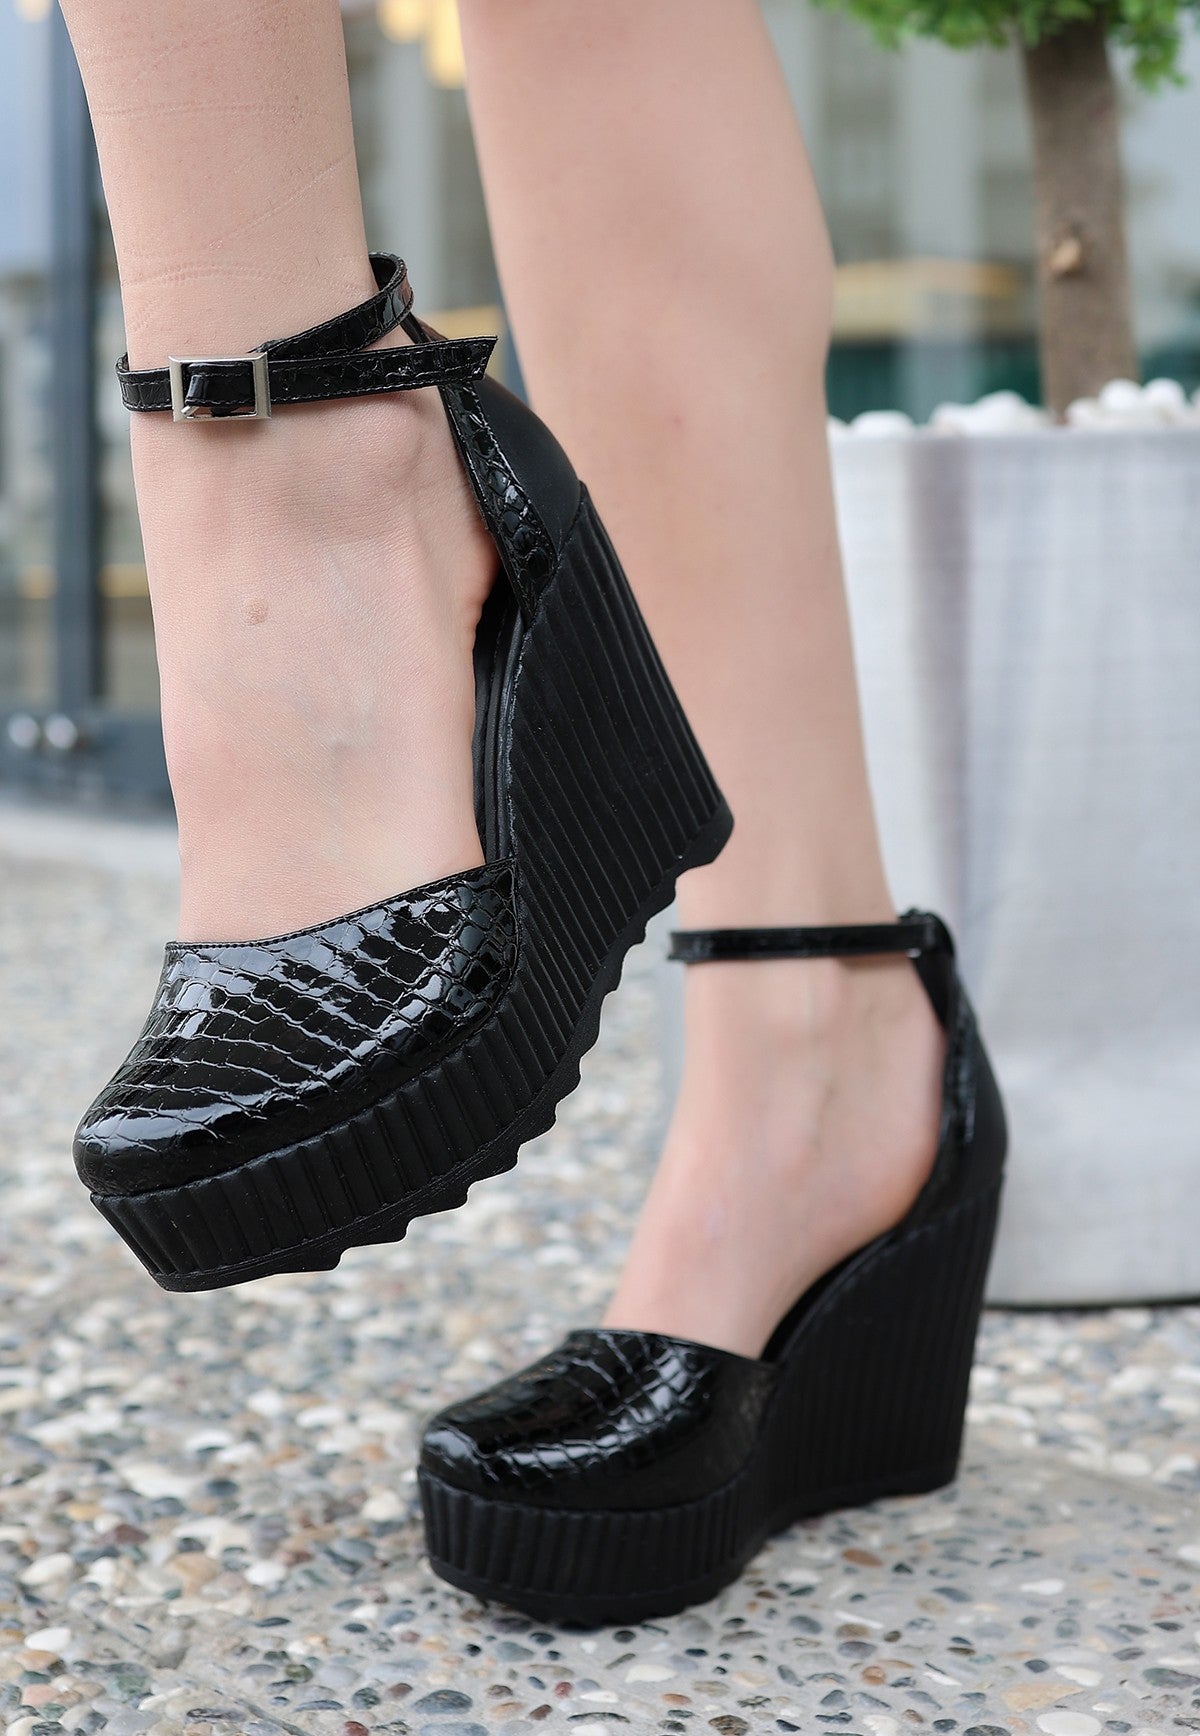 Women's Black Patent Leather Wedge Heel Shoes - STREETMODE™